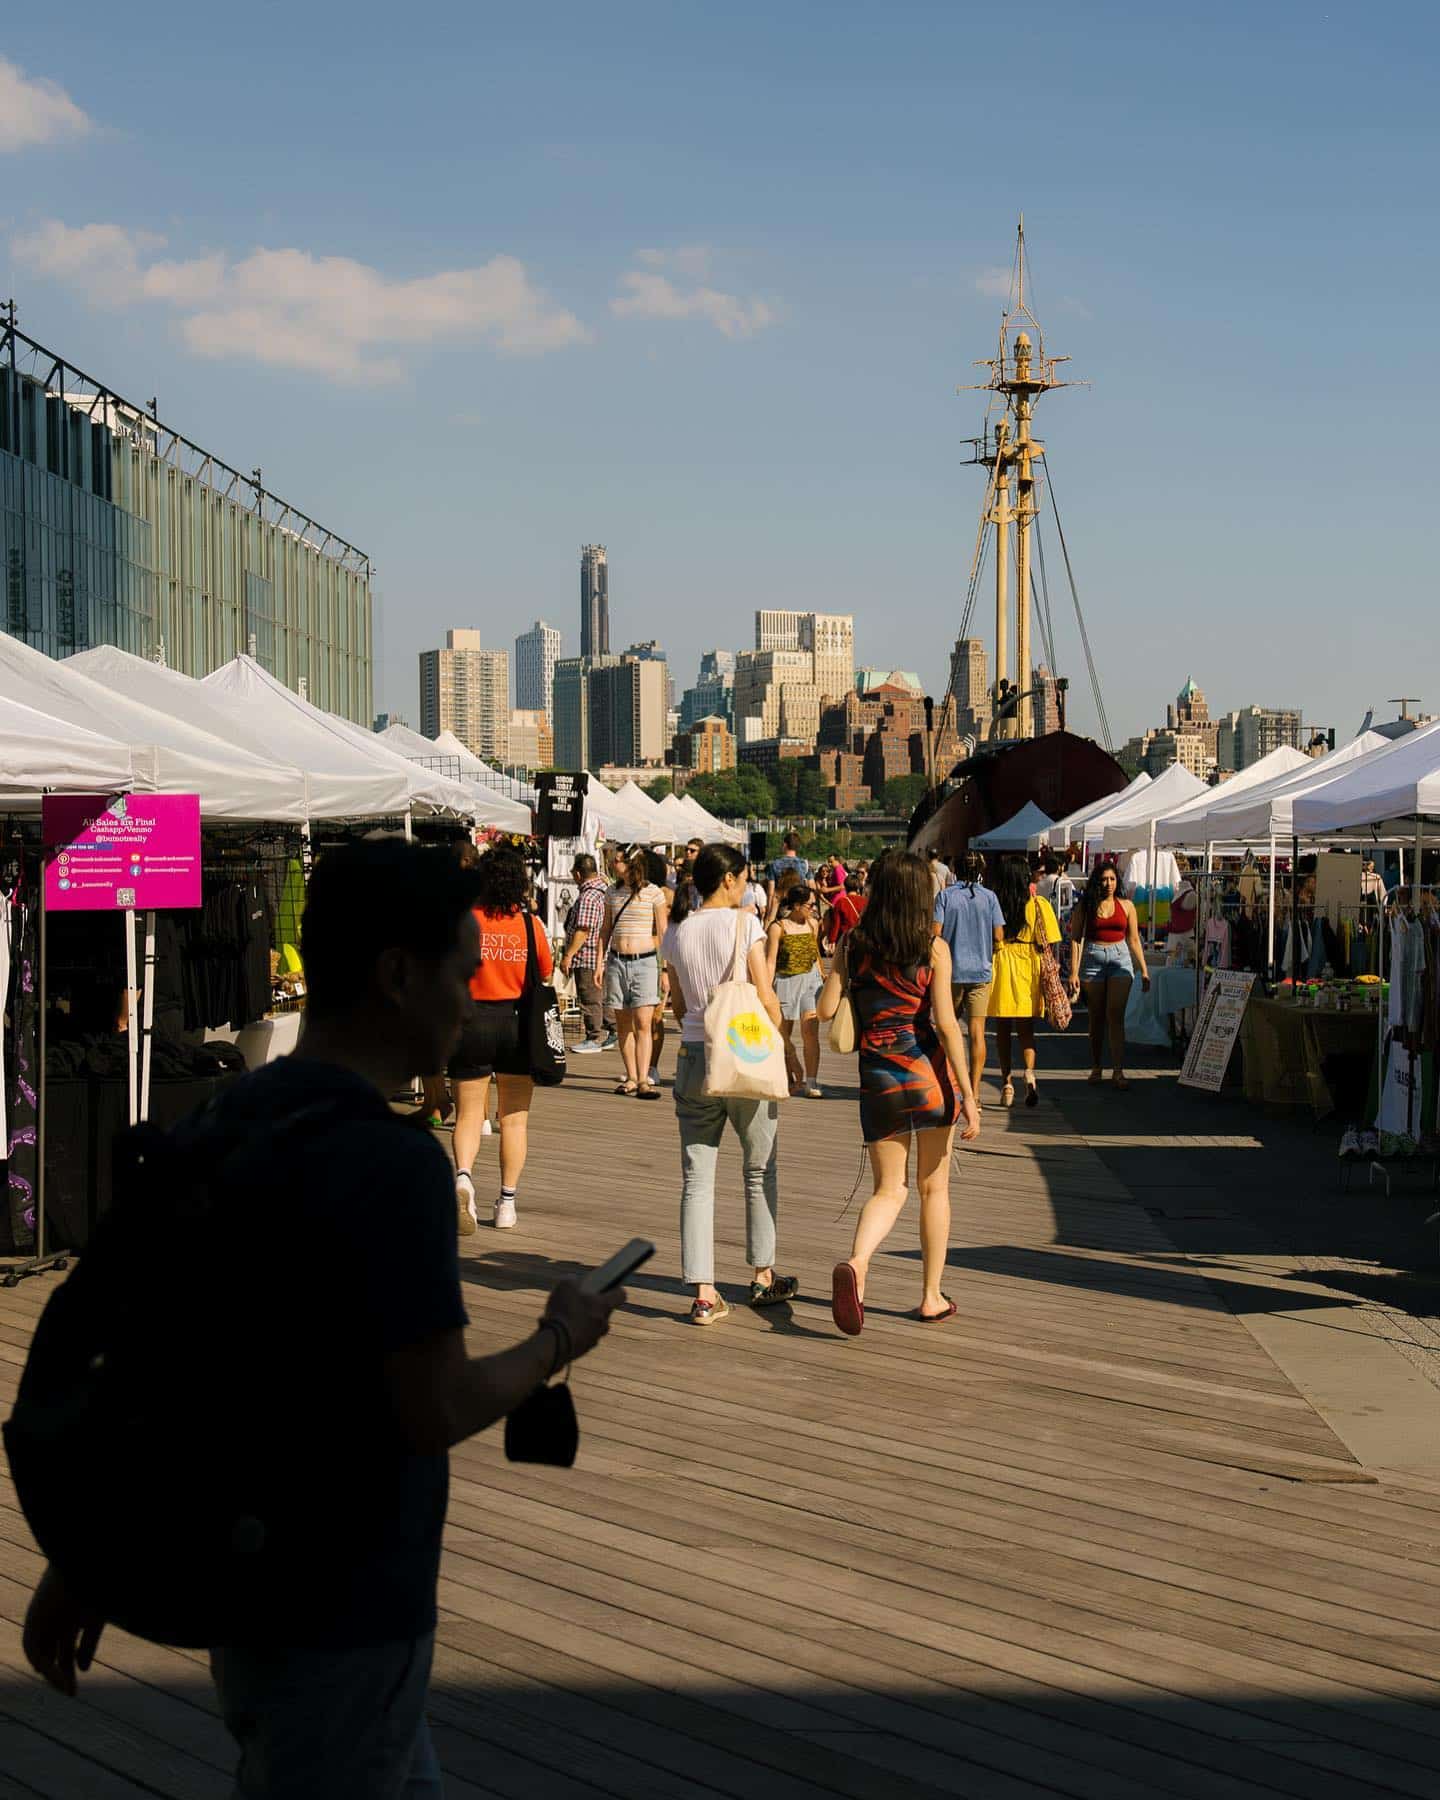 This weekend’s forecast ➤ 100% shopping at the opening weekend of the @hesterstreetfair.  11am – 6pm Seaport Square 🗓️ Sat, 4/22 – Sun, 4/23 Details ➤ link in bio. #TheSeaport